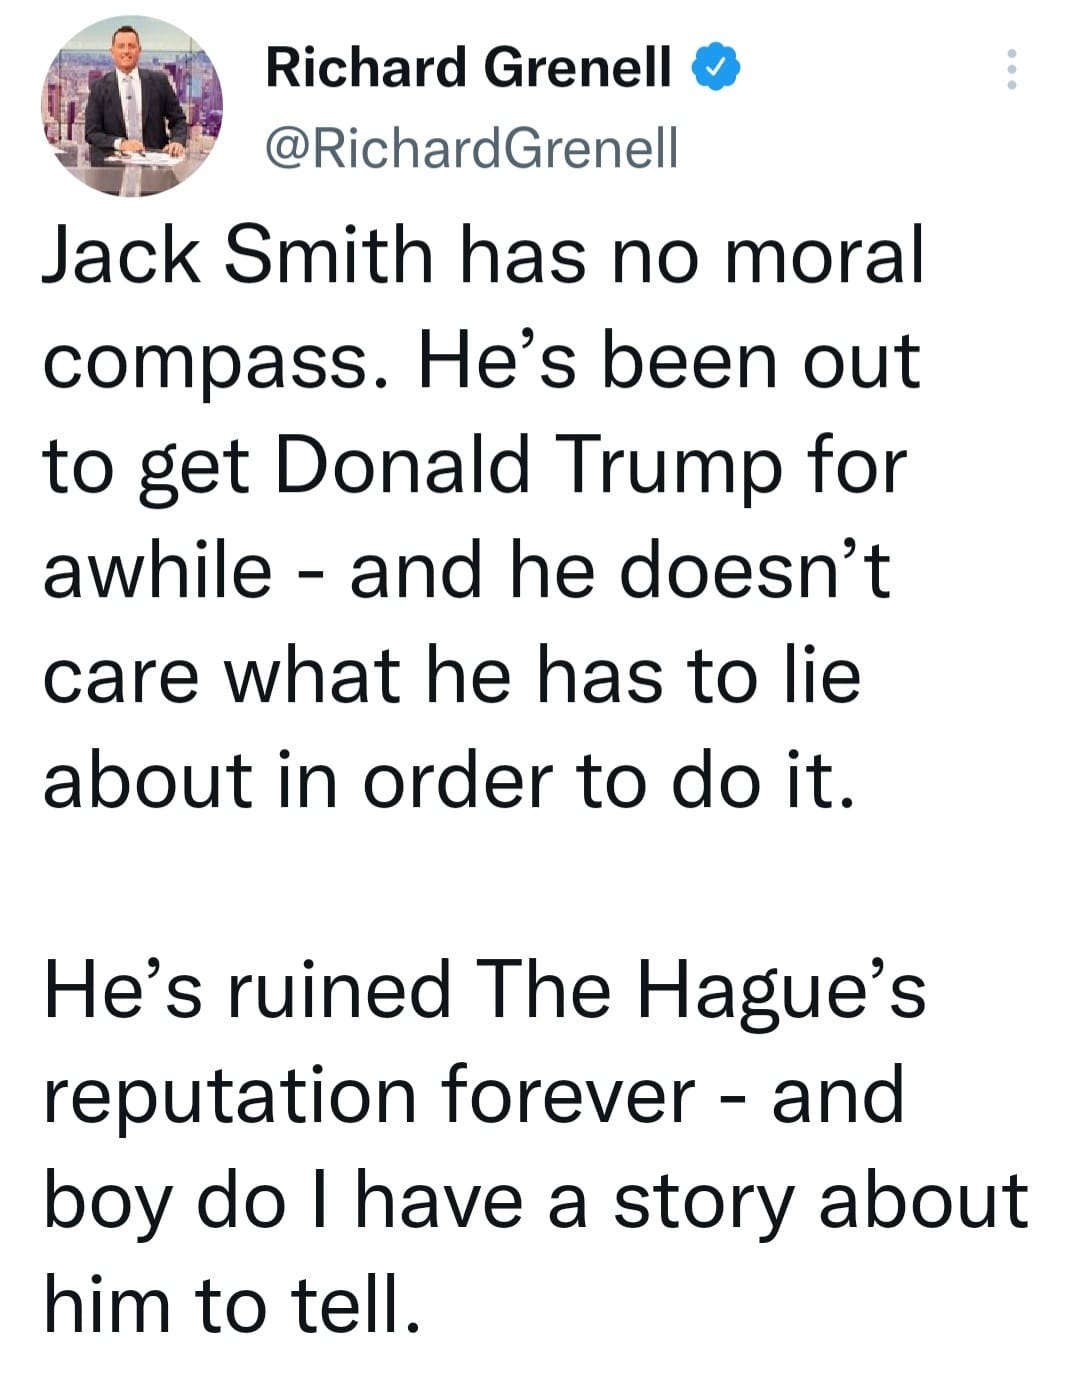 May be a Twitter screenshot of 2 people and text that says 'Richard Grenell @RichardGrenell Jack Smith has no moral compass. He's been out to get Donald Trump for awhile and he doesn't care what he has to lie about in order to do it. He's ruined The Hague's reputation forever and boy do I have a story about him to tell.'